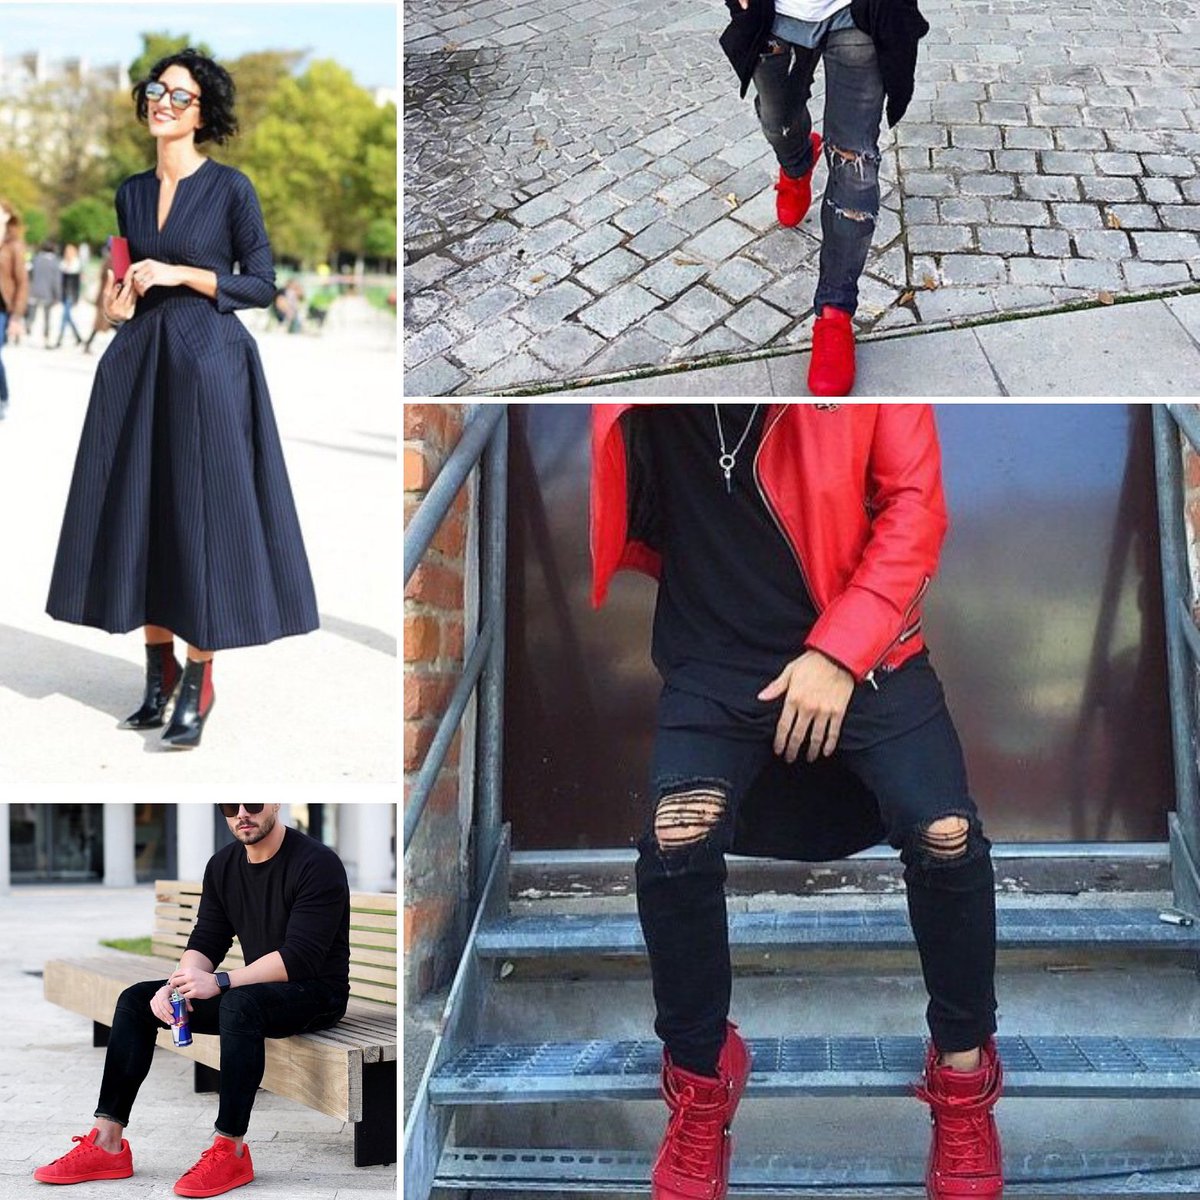 Outflow Afford petroleum Obdurate Essentials on Twitter: "#ObdurateEssentials #MensFashion  #WomensFashion #Men #Women #Dresses #Dress #Heels #Shades #Clutch #Red  #RedSneakers #RedTennisShoes #Sneakers #TennisShoes #Shoes #FittedJeans  #SlimJeans #Jeans #SolidColors ...